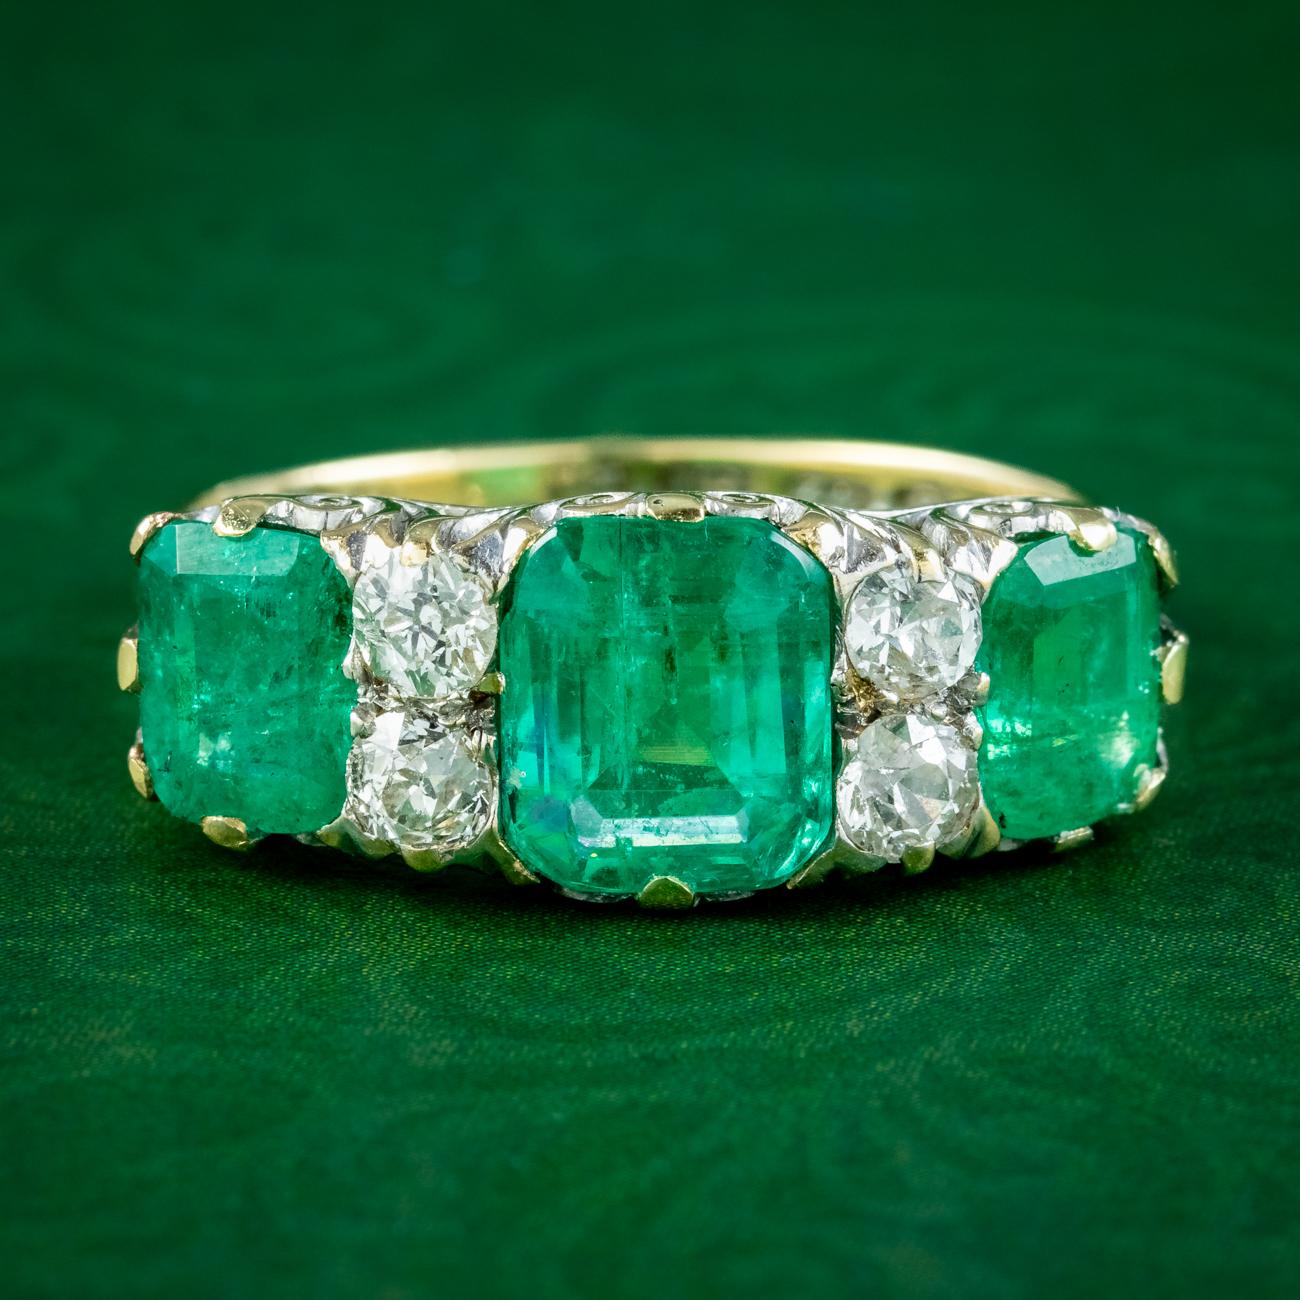 A magnificent antique Victorian carved half hoop ring adorned with three large step-cut emeralds and four old European cut diamonds which are all natural and detailed in the accompanying gem certification.

The emeralds have a bright, vivid green